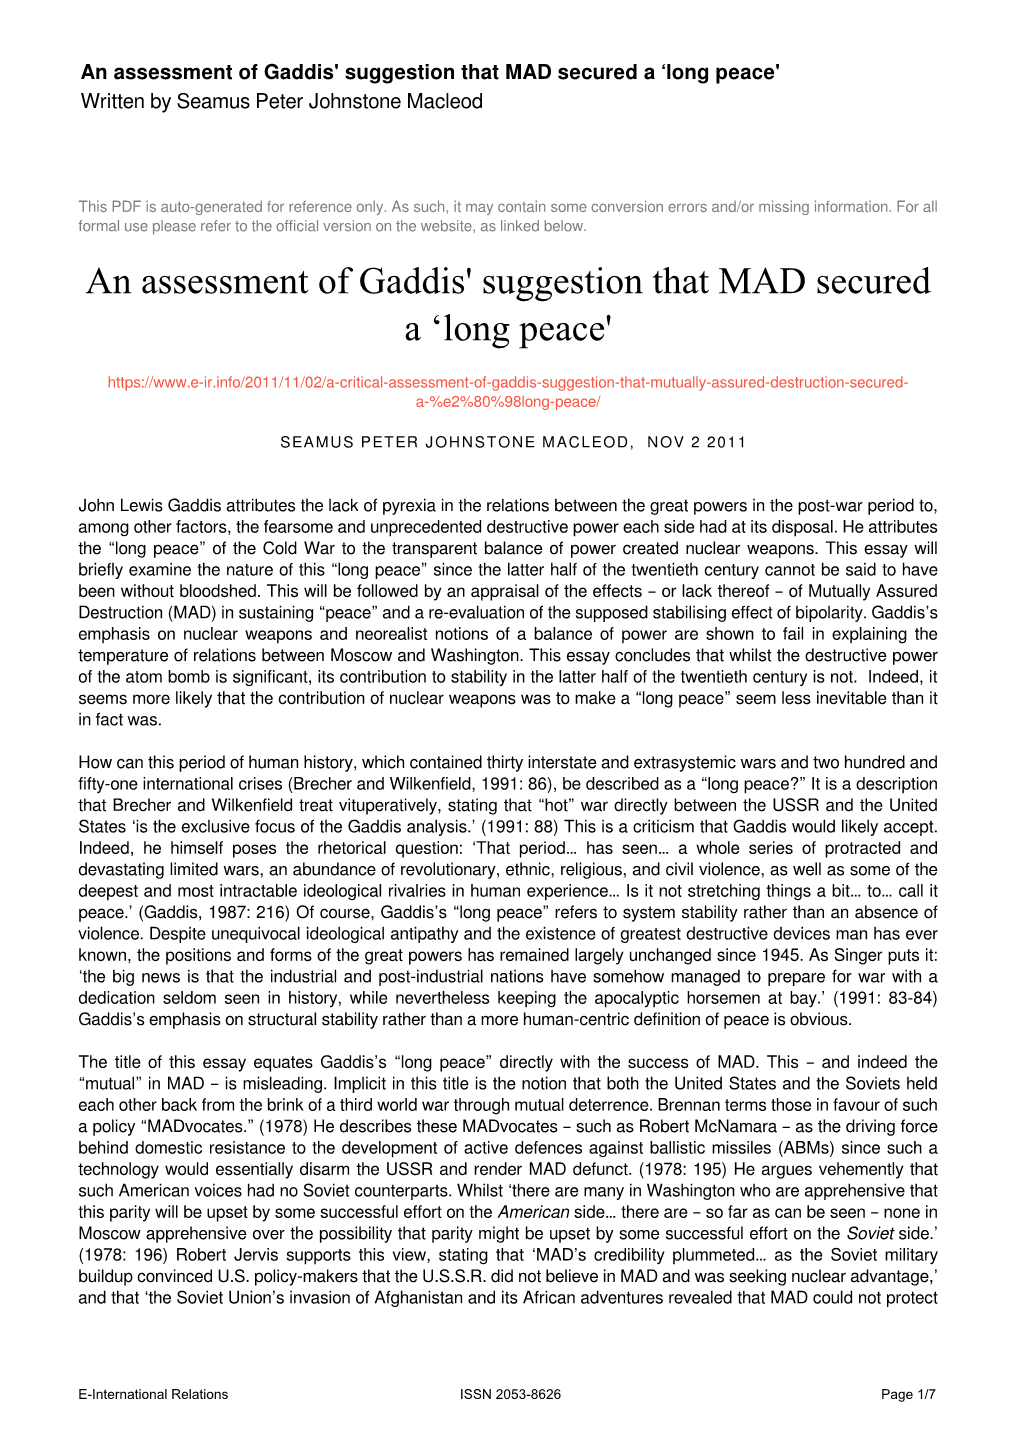 An Assessment of Gaddis' Suggestion That MAD Secured a 'Long Peace'